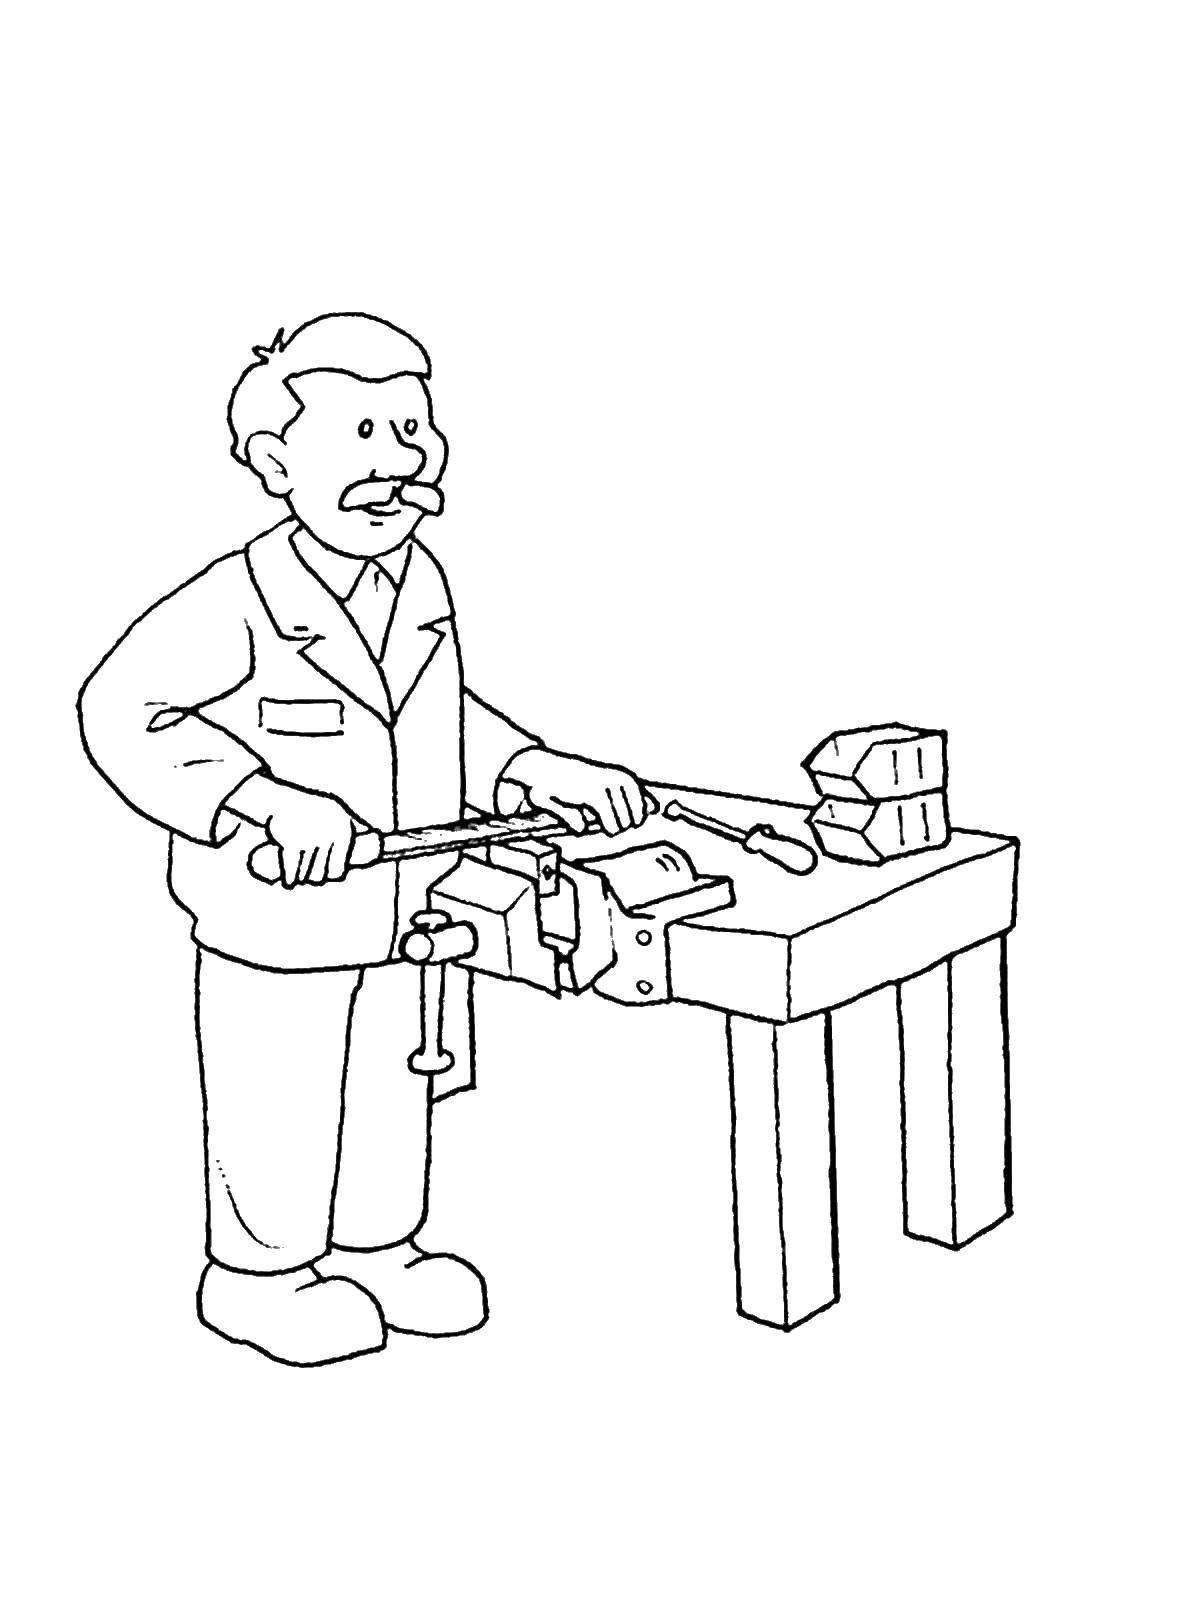 Coloring Carpenter. Category a profession. Tags:  Profession.